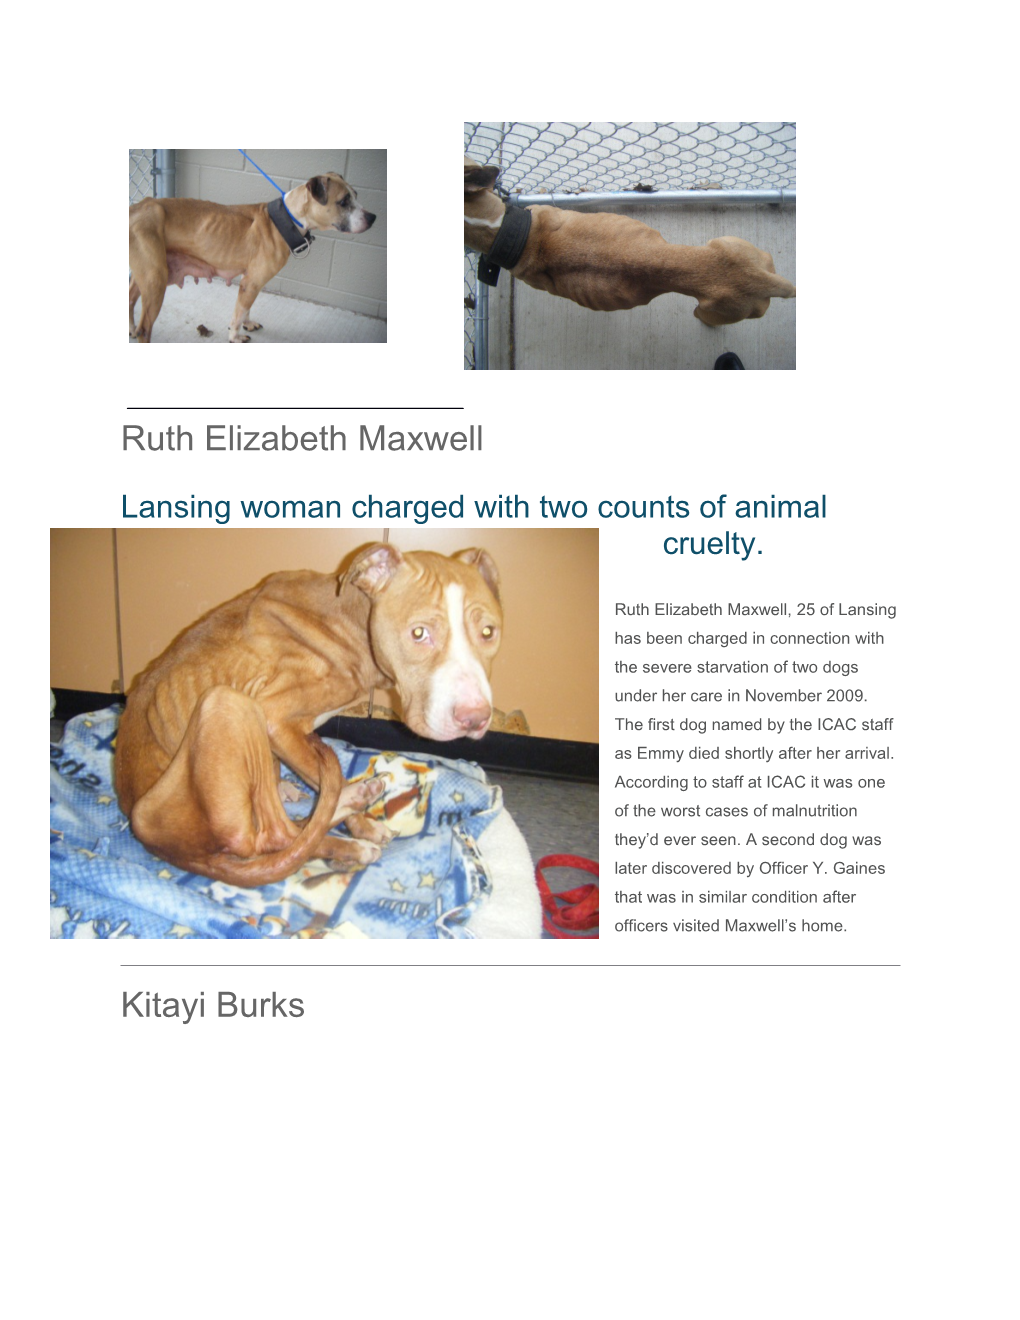 IN the BOOKS: Animal Abuse and Neglect Case Files in 2011